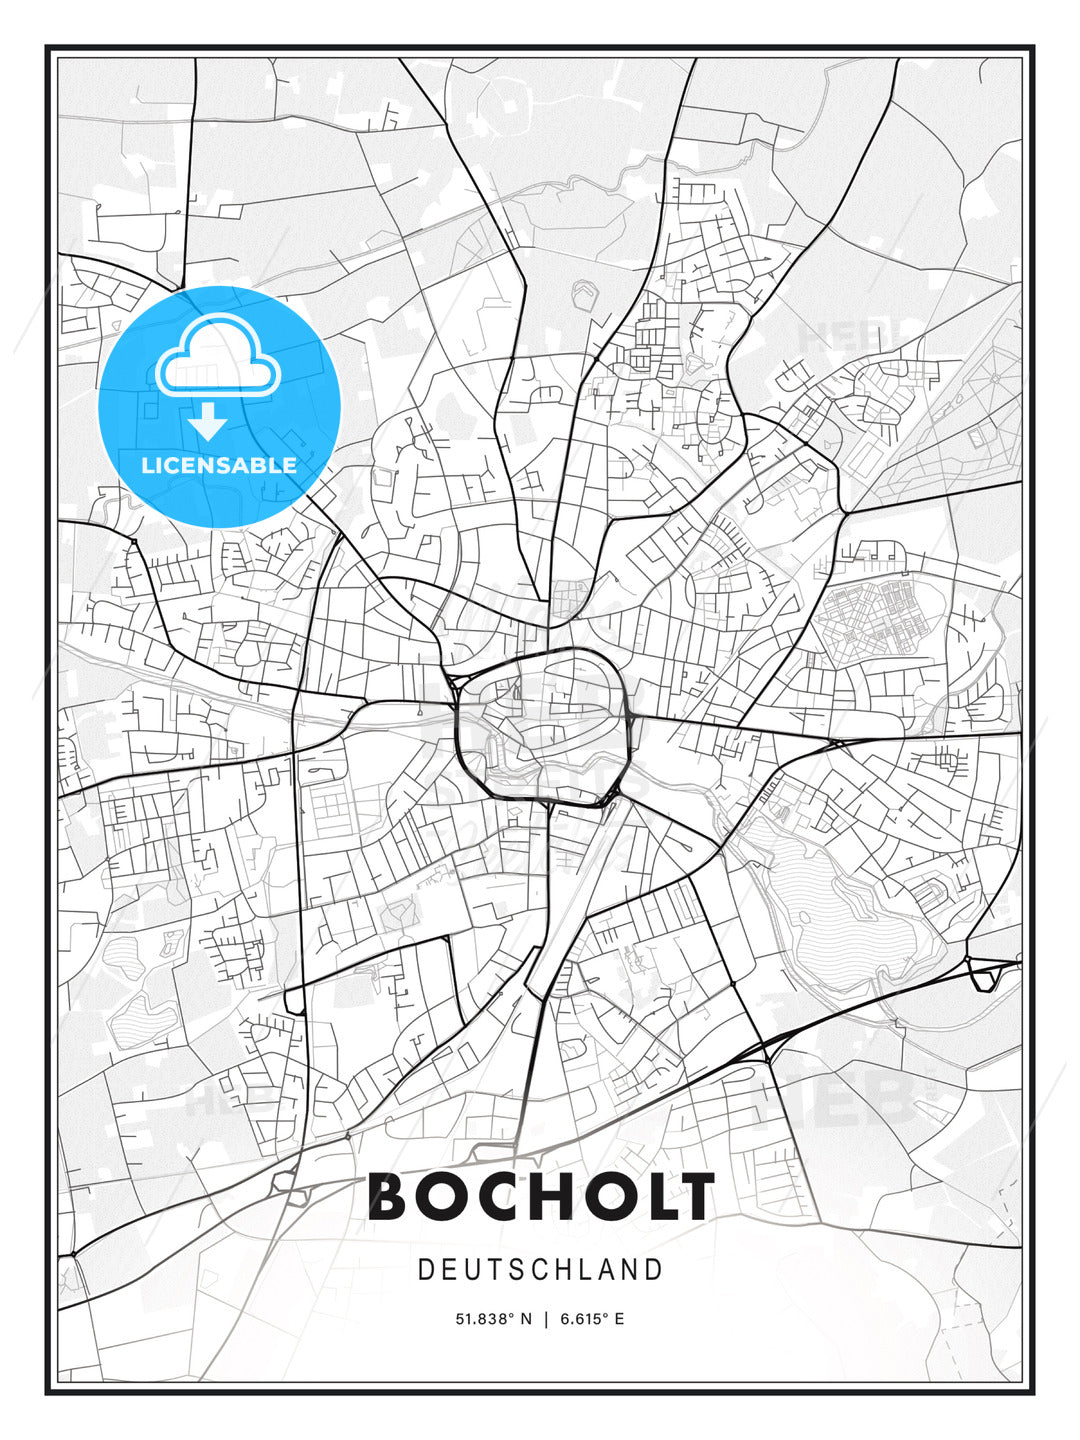 Bocholt, Germany, Modern Print Template in Various Formats - HEBSTREITS Sketches